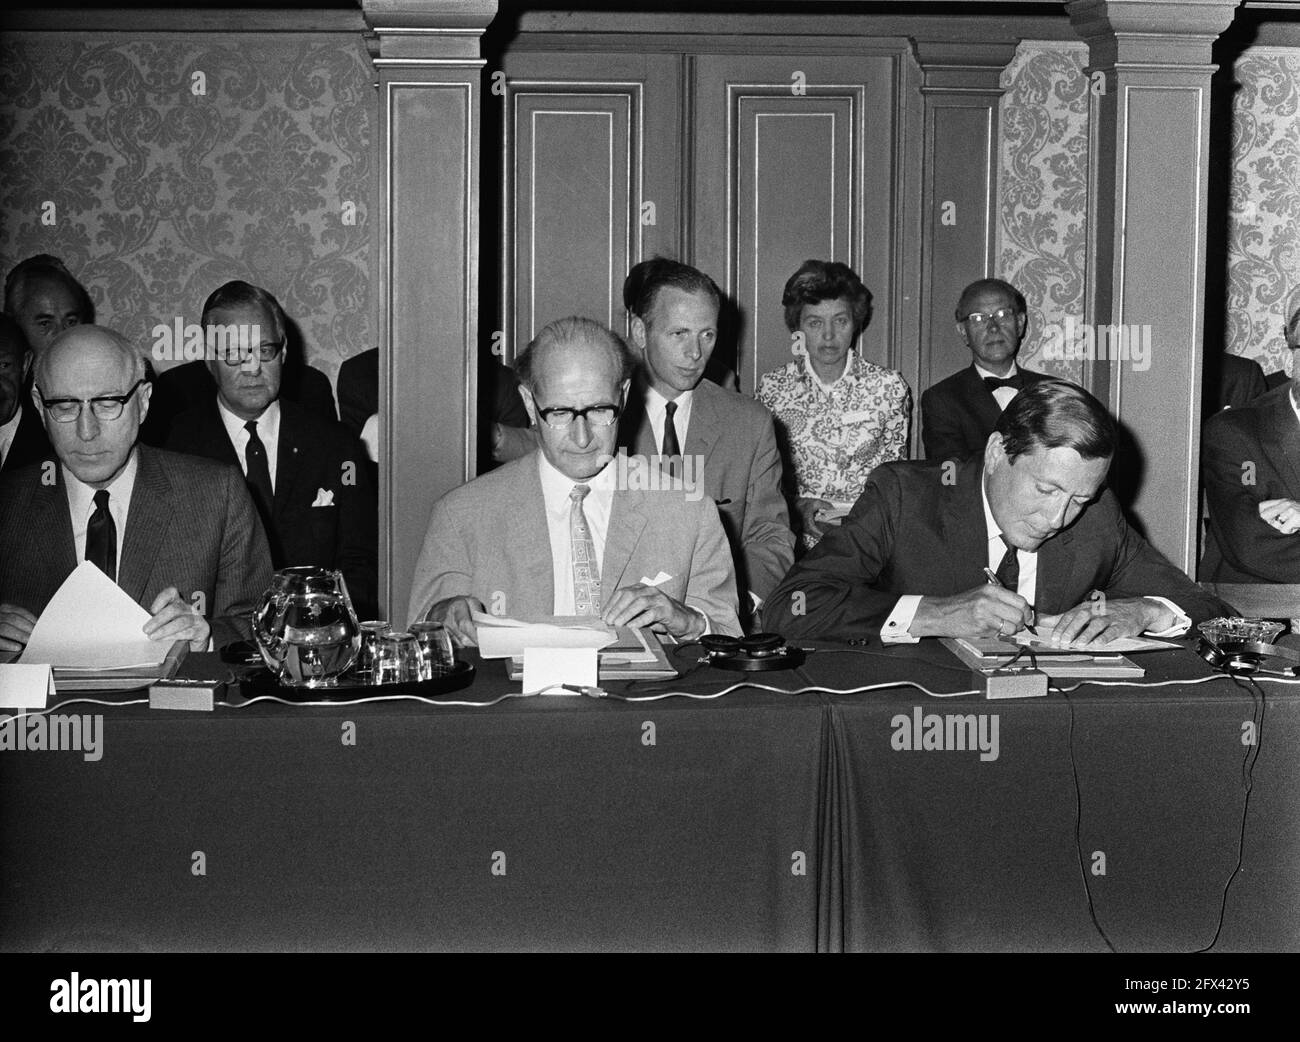 Pr. Claus at 6th Assembly General Europa Nostra in building Kon.NL Acad. Weten Adam burgm. Samkalden, Min. Schut, Prince Claus, June 12, 1969, The Netherlands, 20th century press agency photo, news to remember, documentary, historic photography 1945-1990, visual stories, human history of the Twentieth Century, capturing moments in time Stock Photo